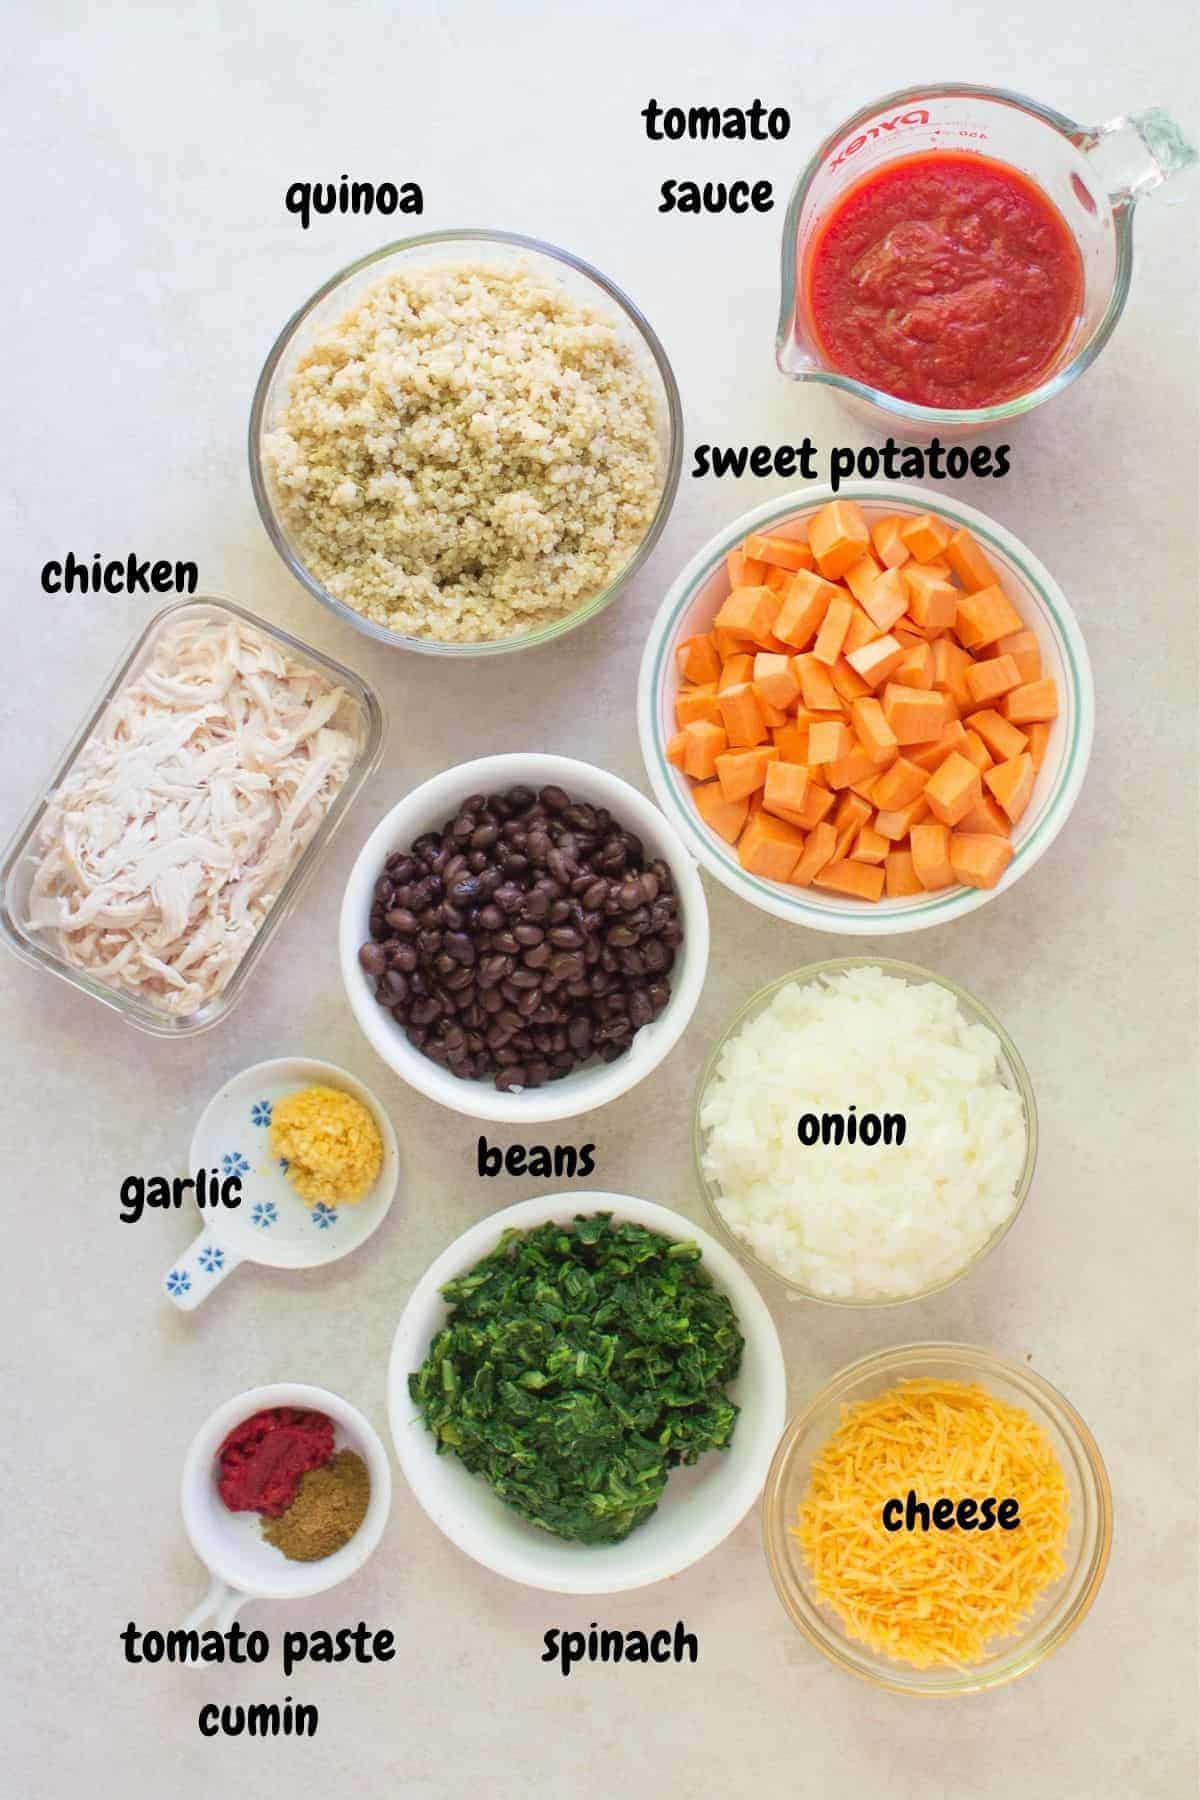 all the ingredients laid out on a white background.